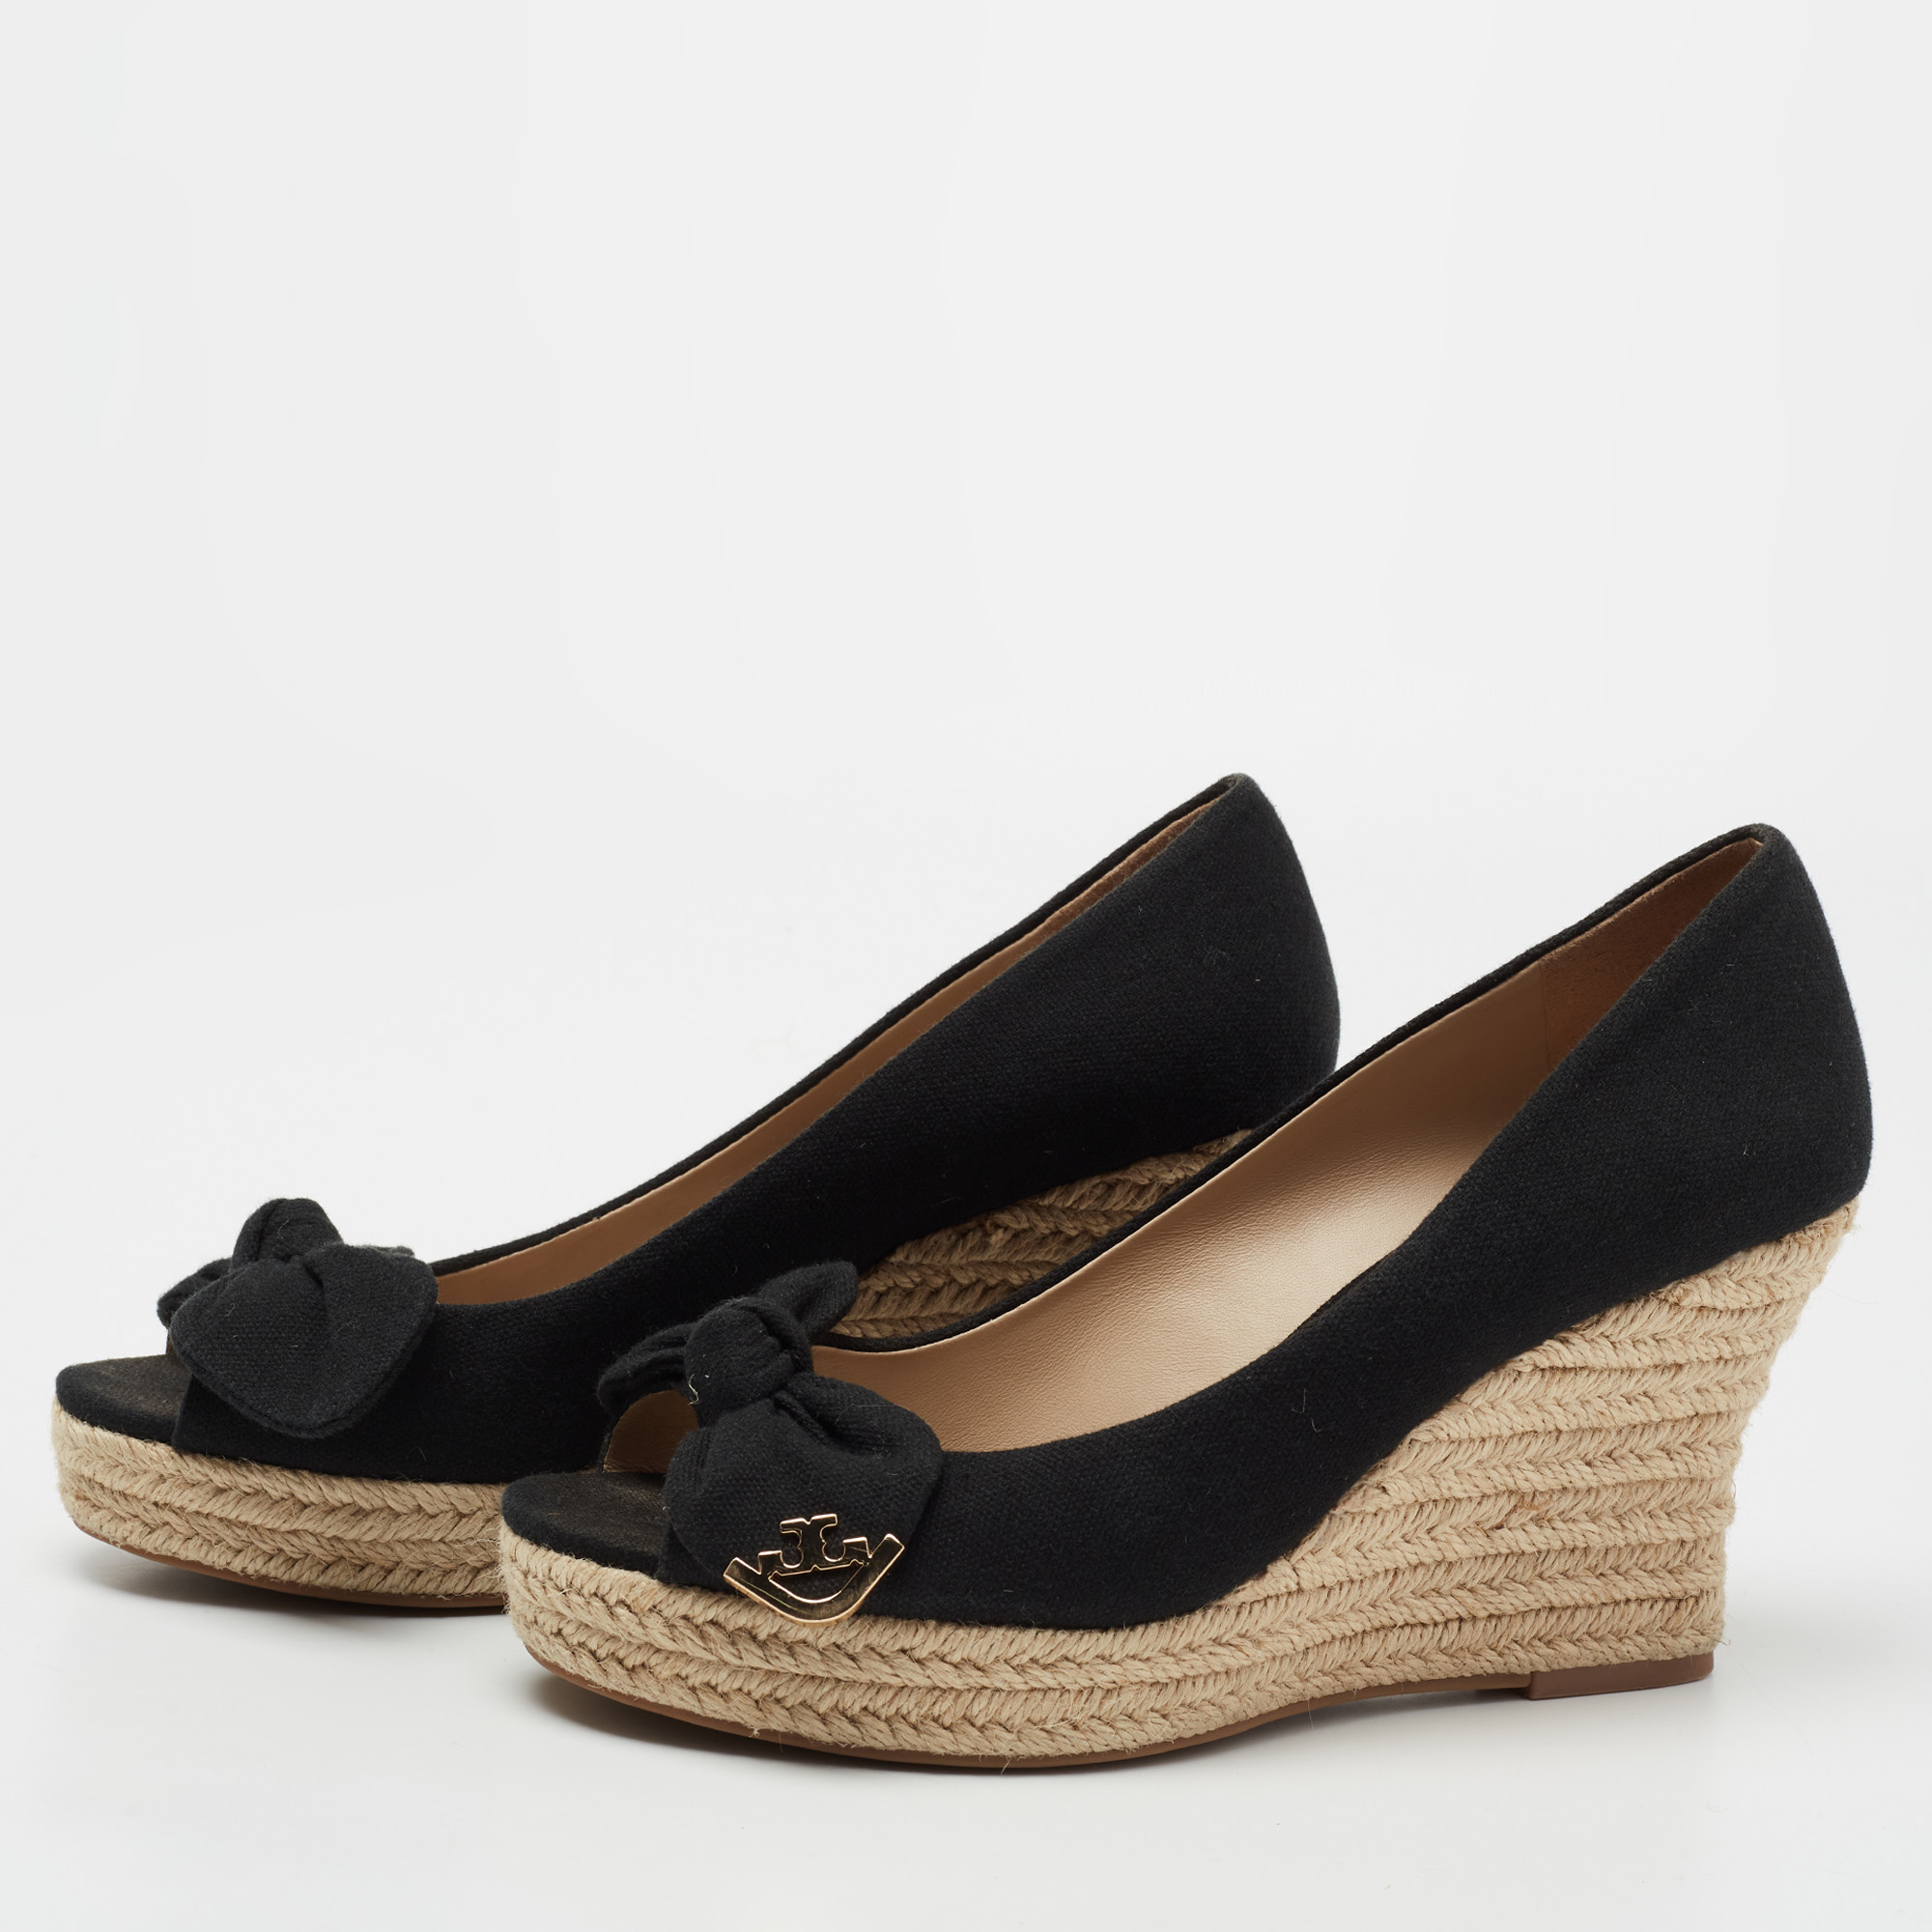 

Tory Burch Black Fabric Bow Peep-Toe Espadrille Wedge Pumps Size Size